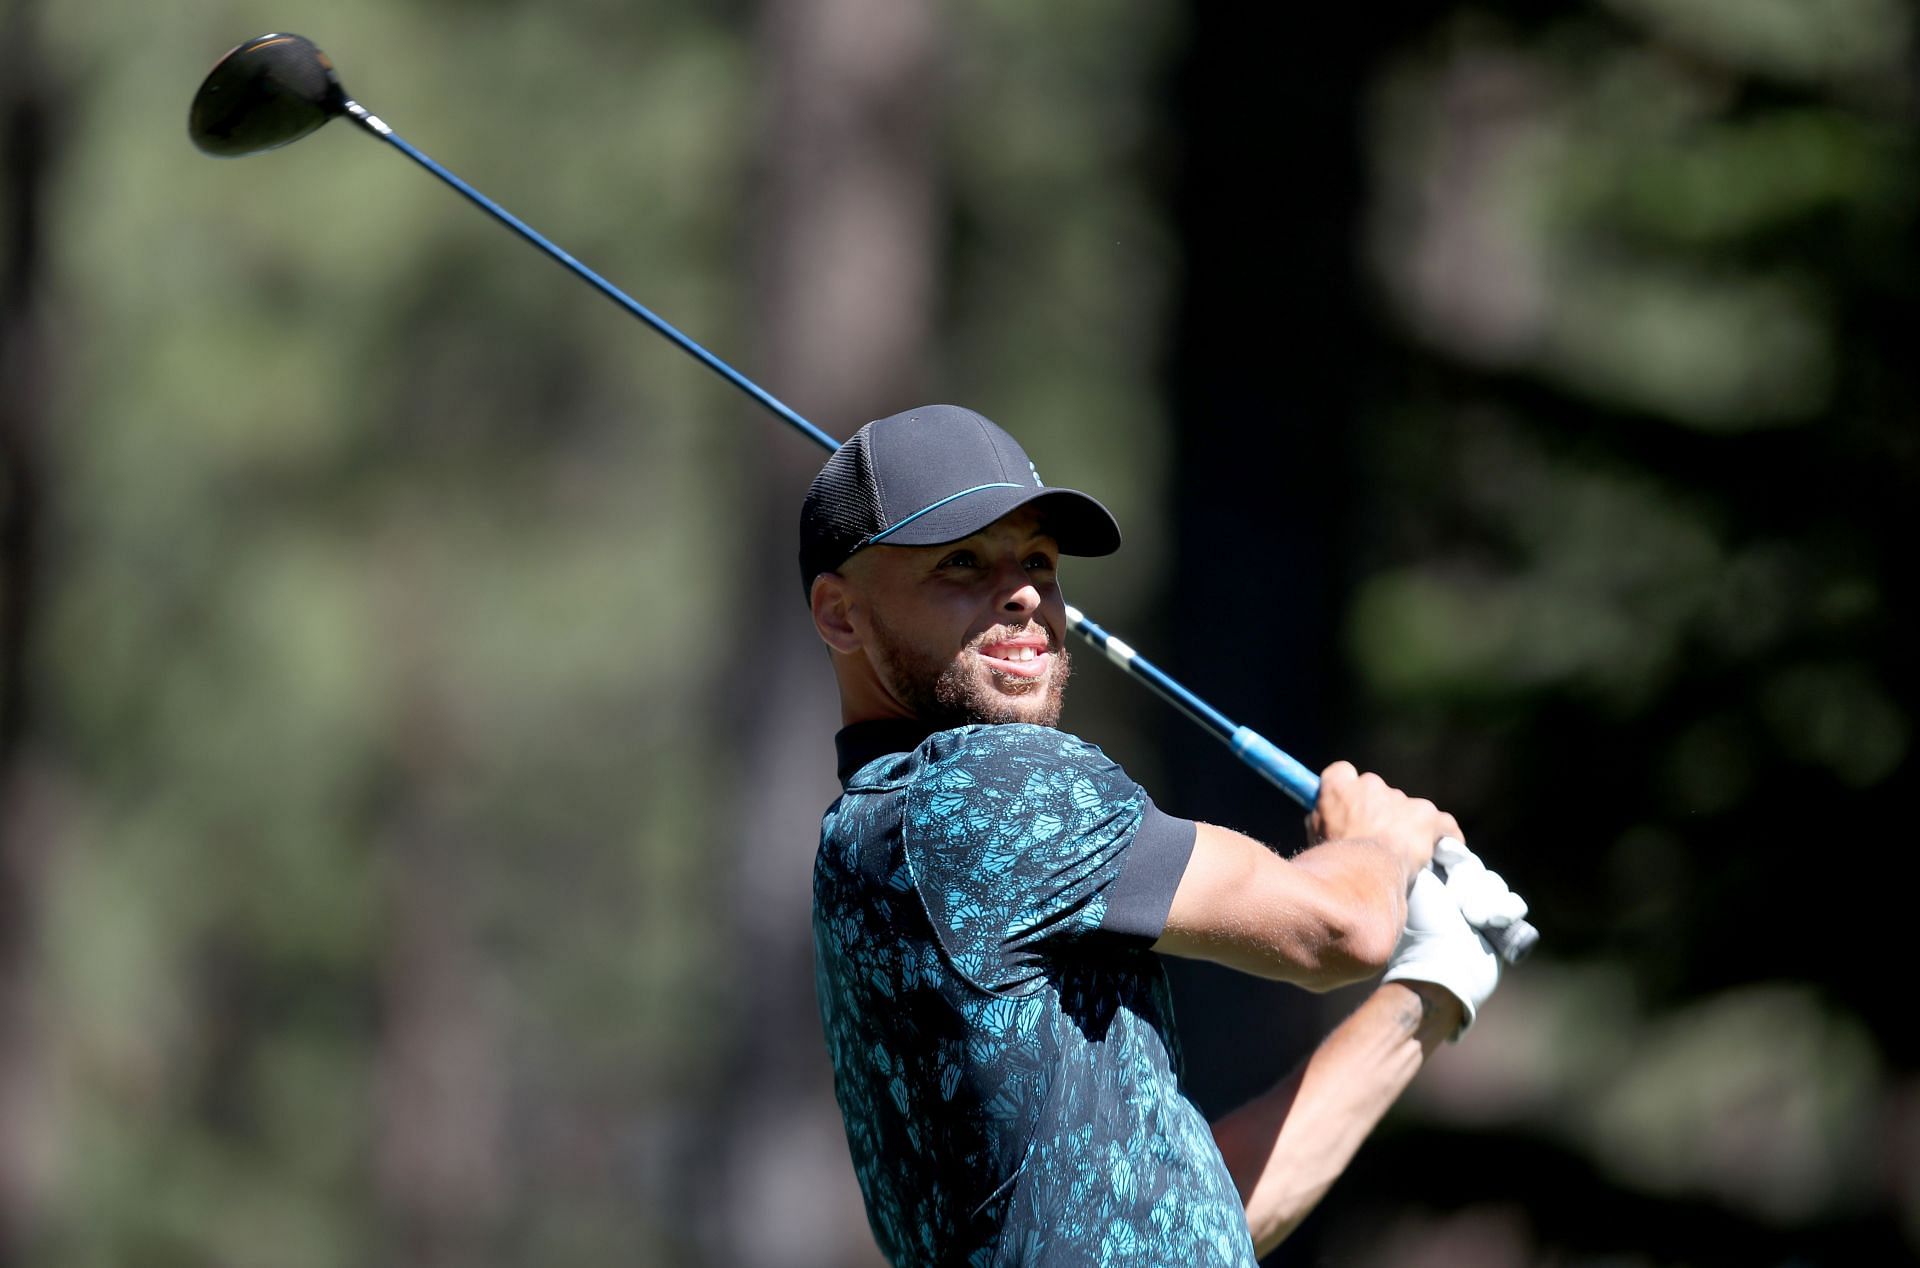 Steph Curry at the American Century Championship - Final Round